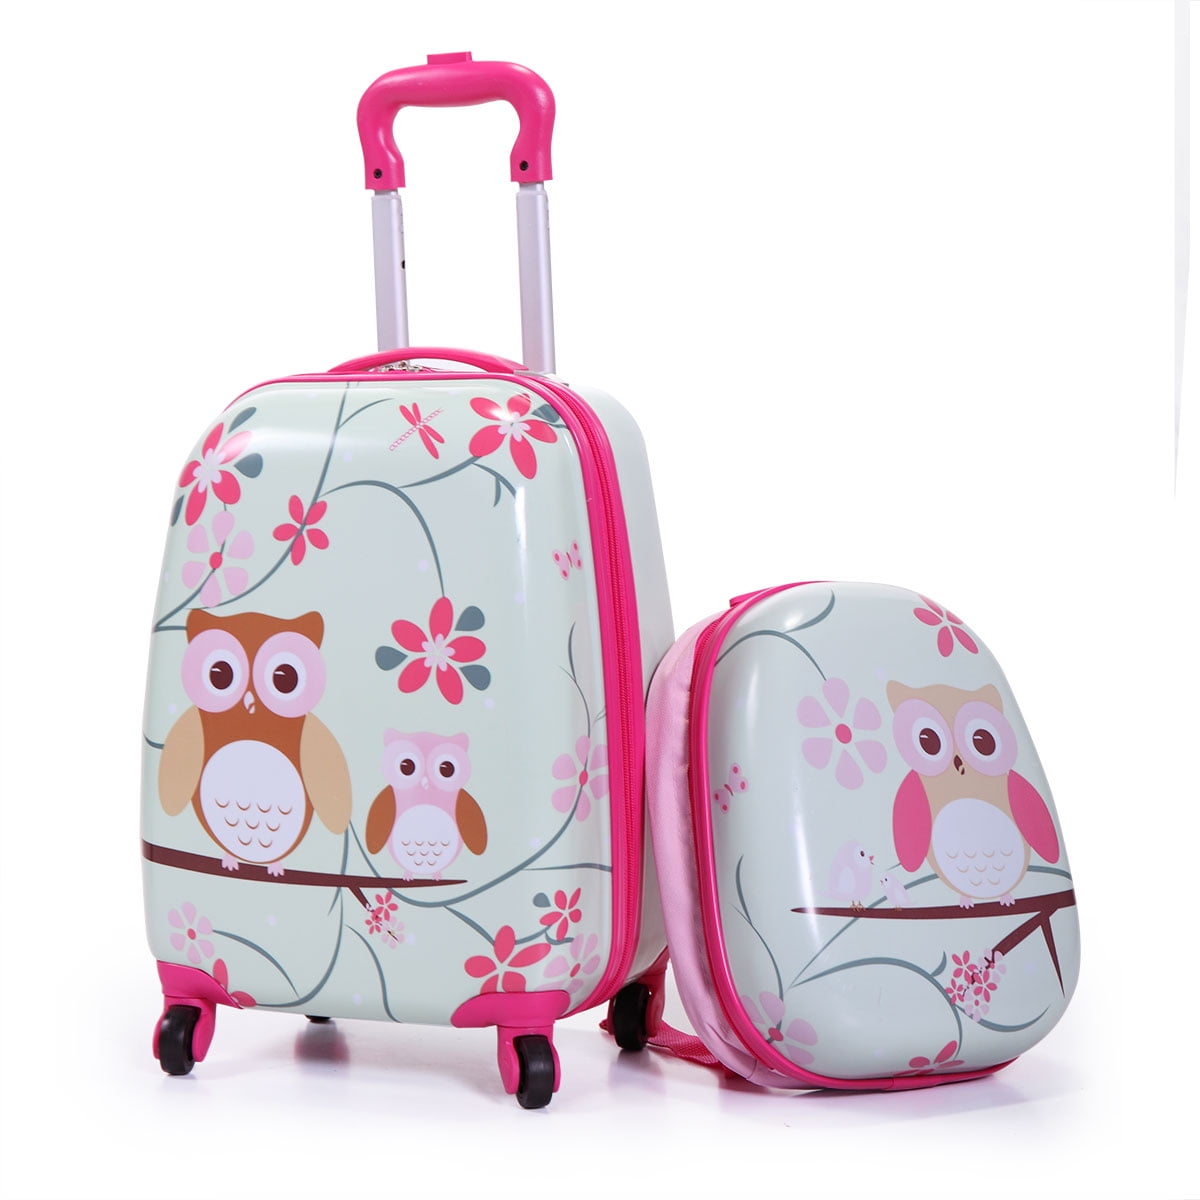 LHONE 2 Piece Kids Luggage Travel Set 12 16 Carry On Luggage for Kids Upright Hard Side Hard Shell 4 Wheel Travel Trolley ABS for Girls Boys Blue